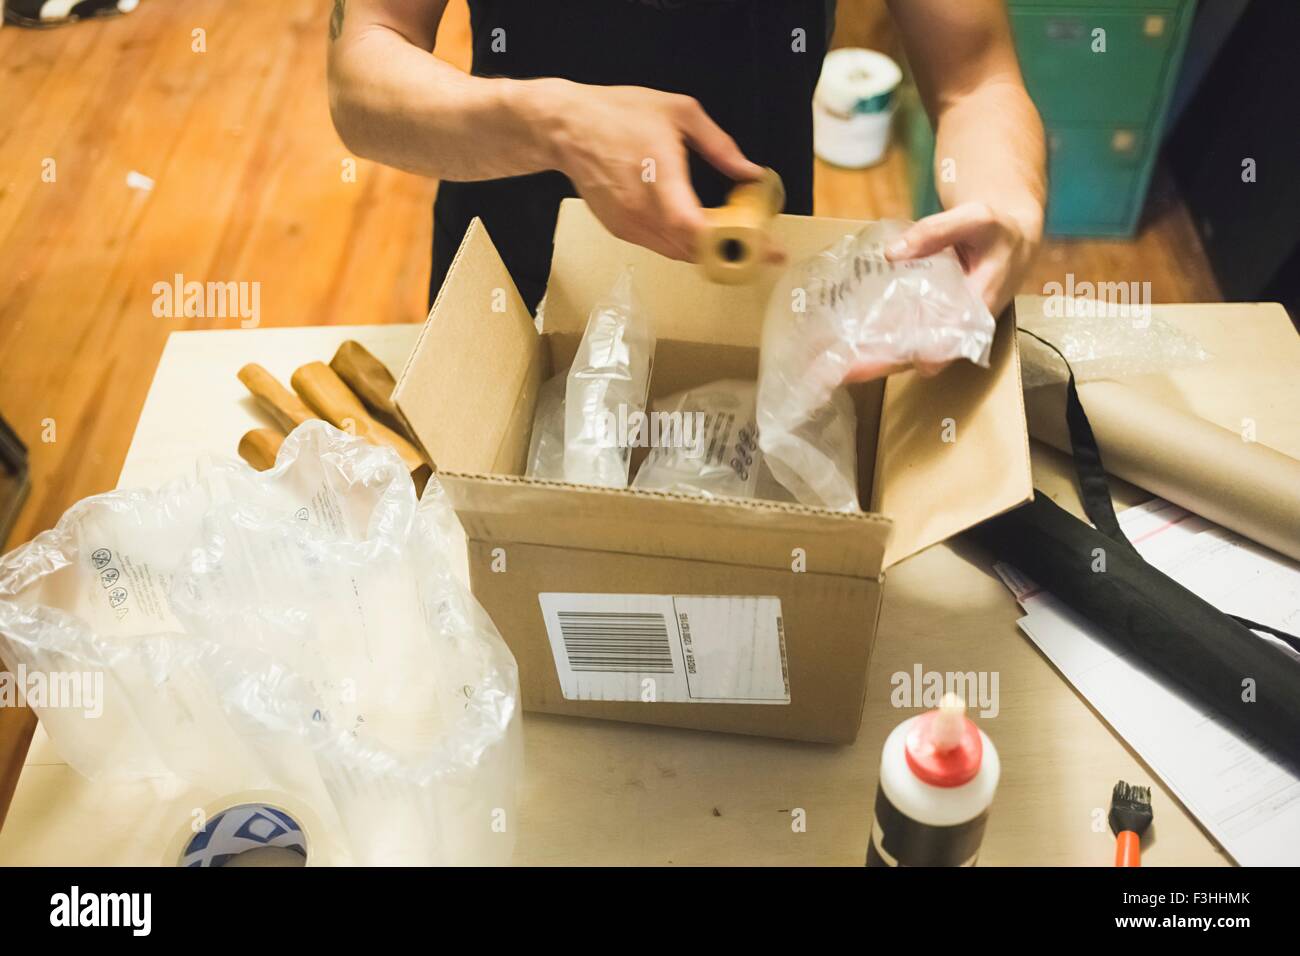 High angle view of young mans hands using bubble wrap to prepare parcel for delivery Stock Photo